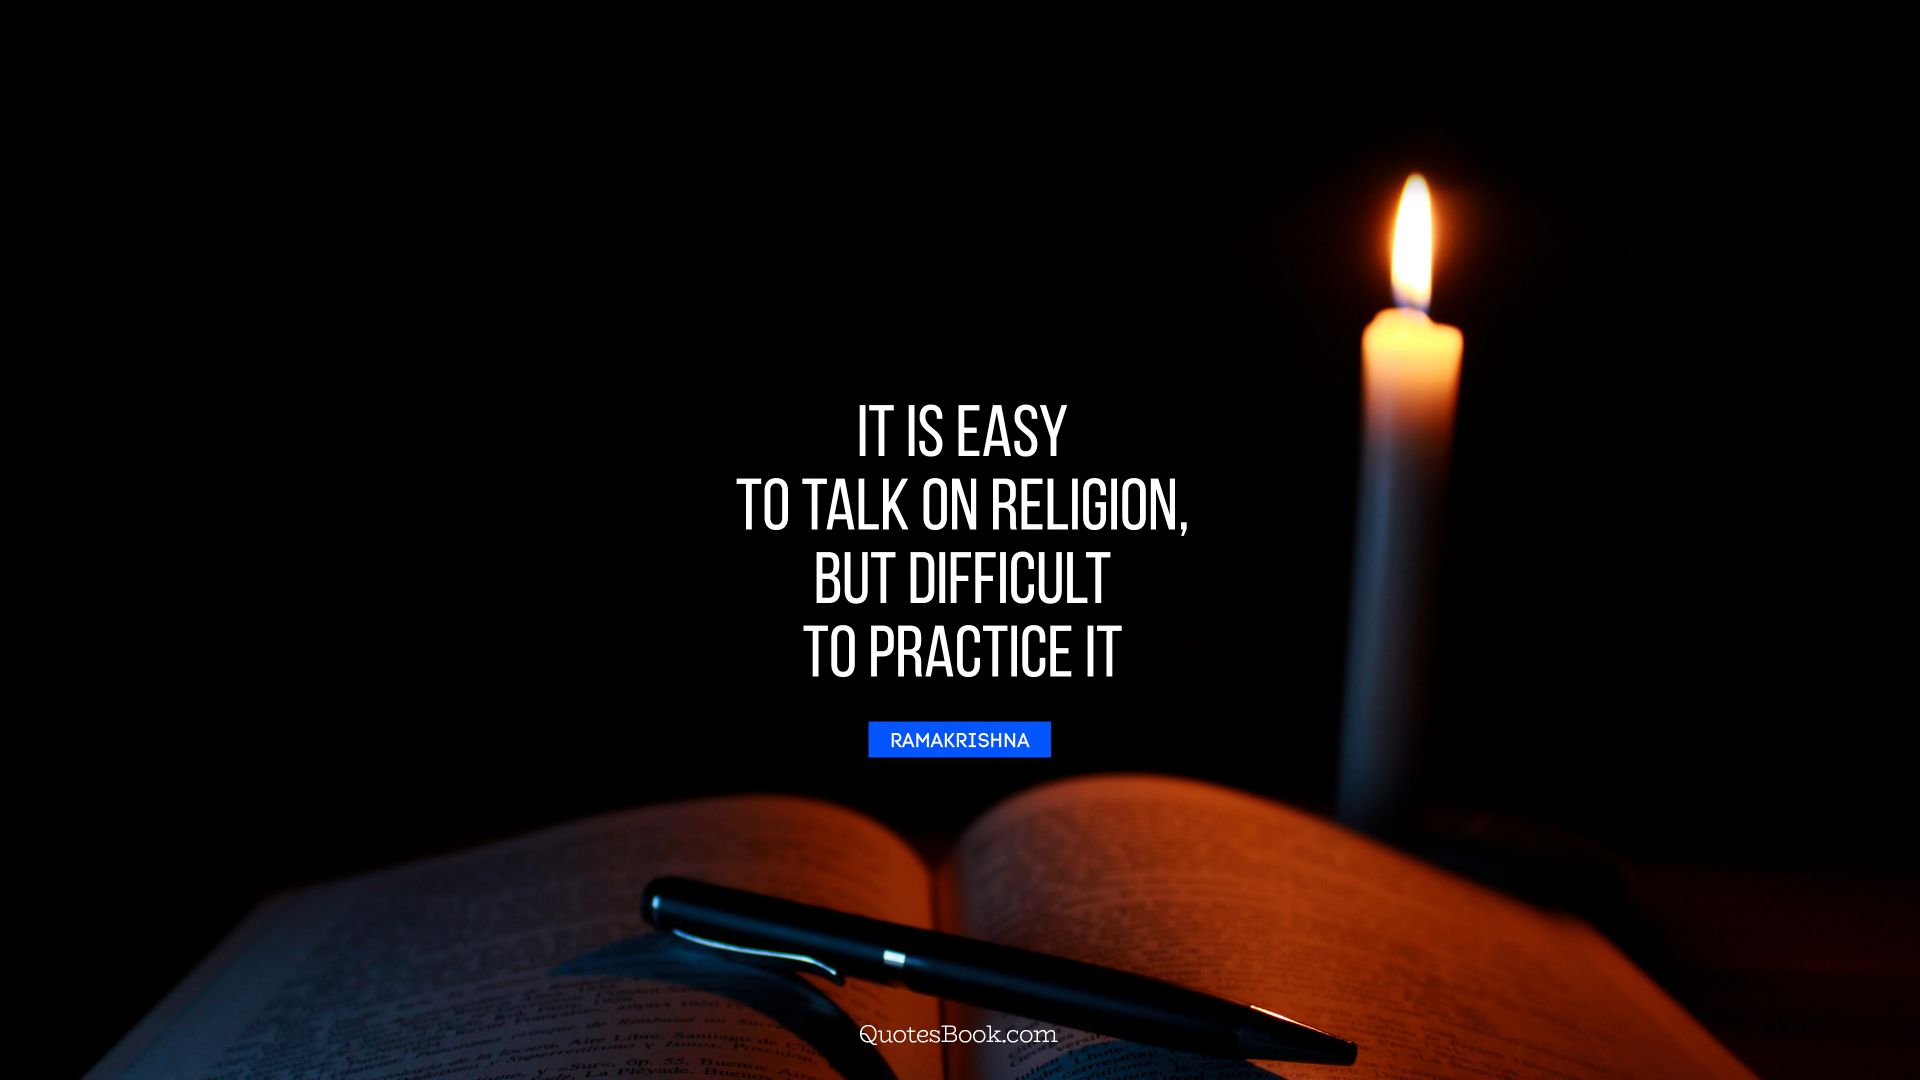 It is easy to talk on religion, but difficult to practice it. - Quote by Ramakrishna